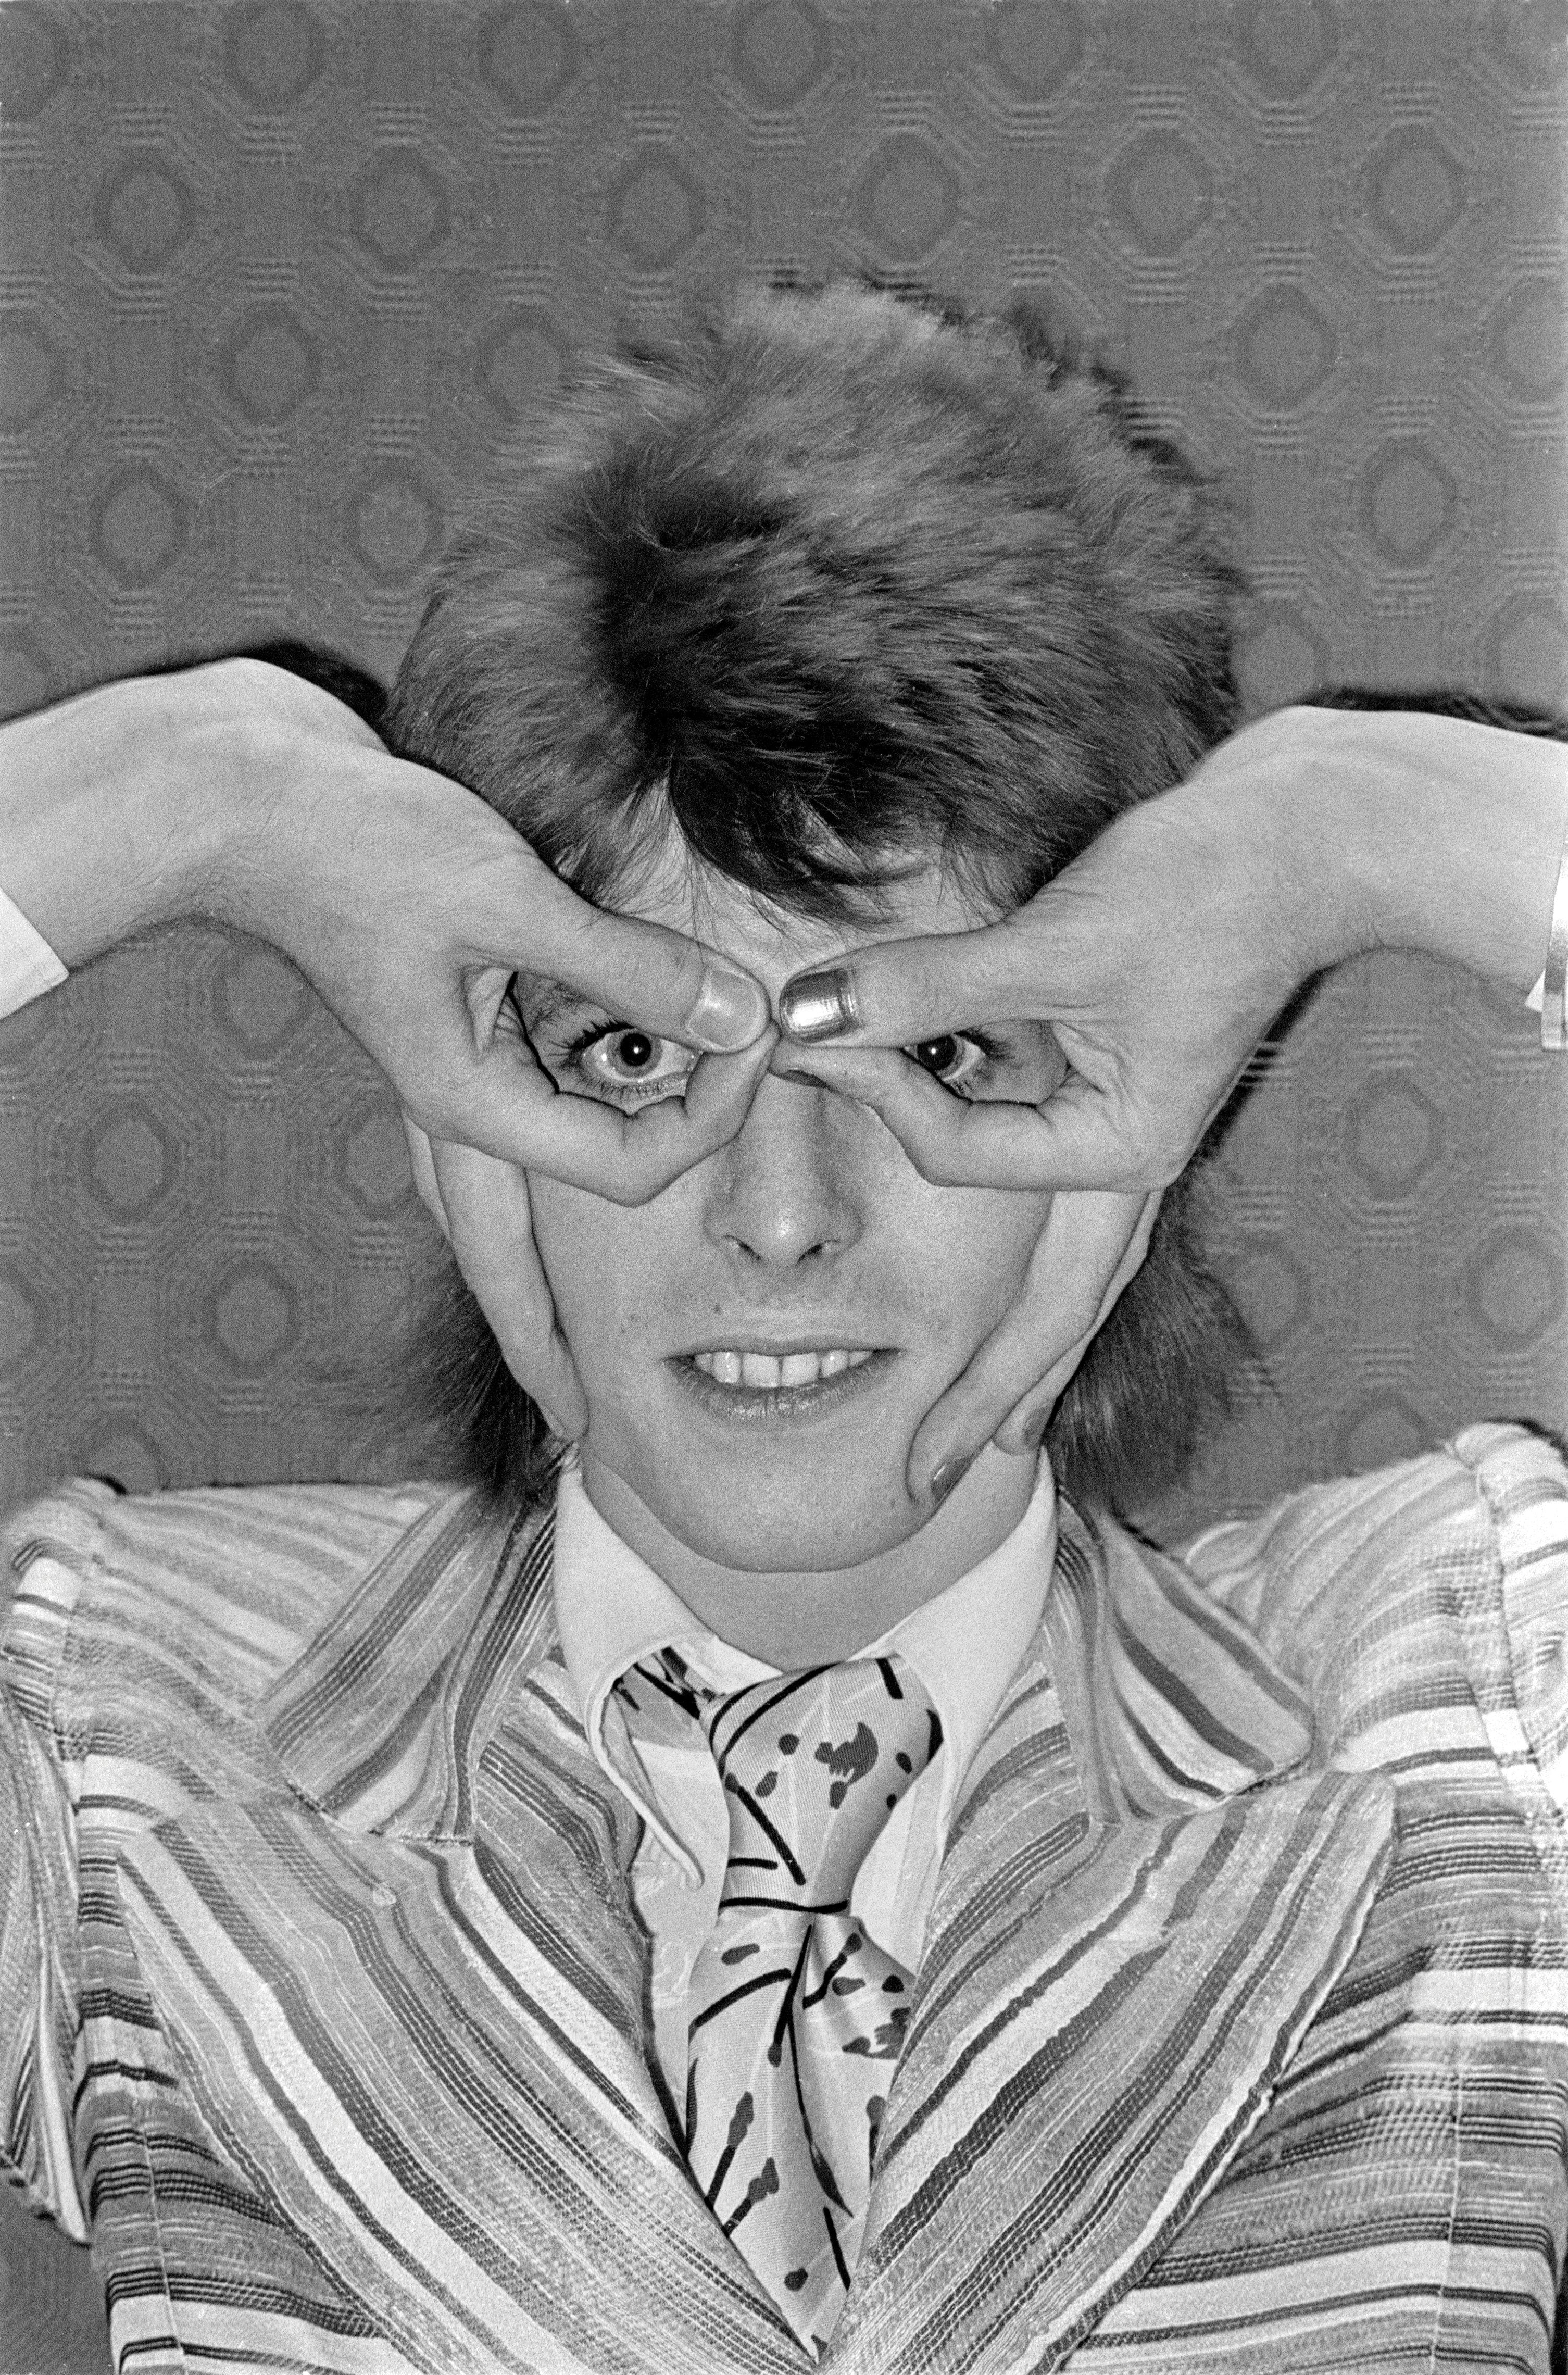 He was David Bowie's official photographer